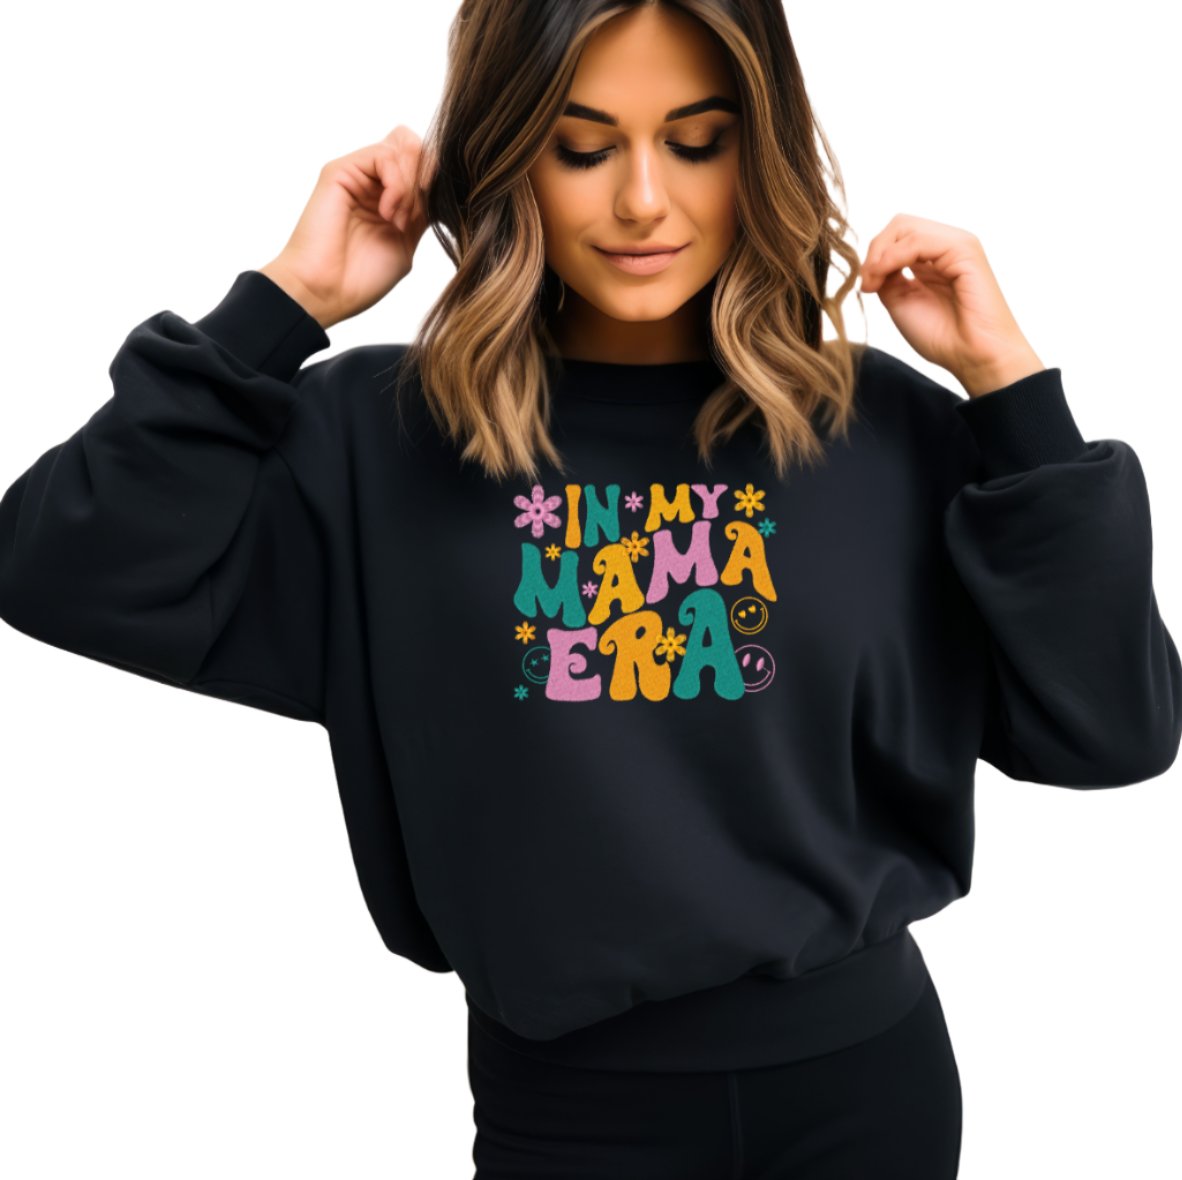 🌟 Step into comfort and style with the Embroidery made In My Mama Era Design on the Champion Double Dry Eco® Crew. Perfect for any occasion, indoors or out. Don't miss out on this special Mother's Day event! 🌷